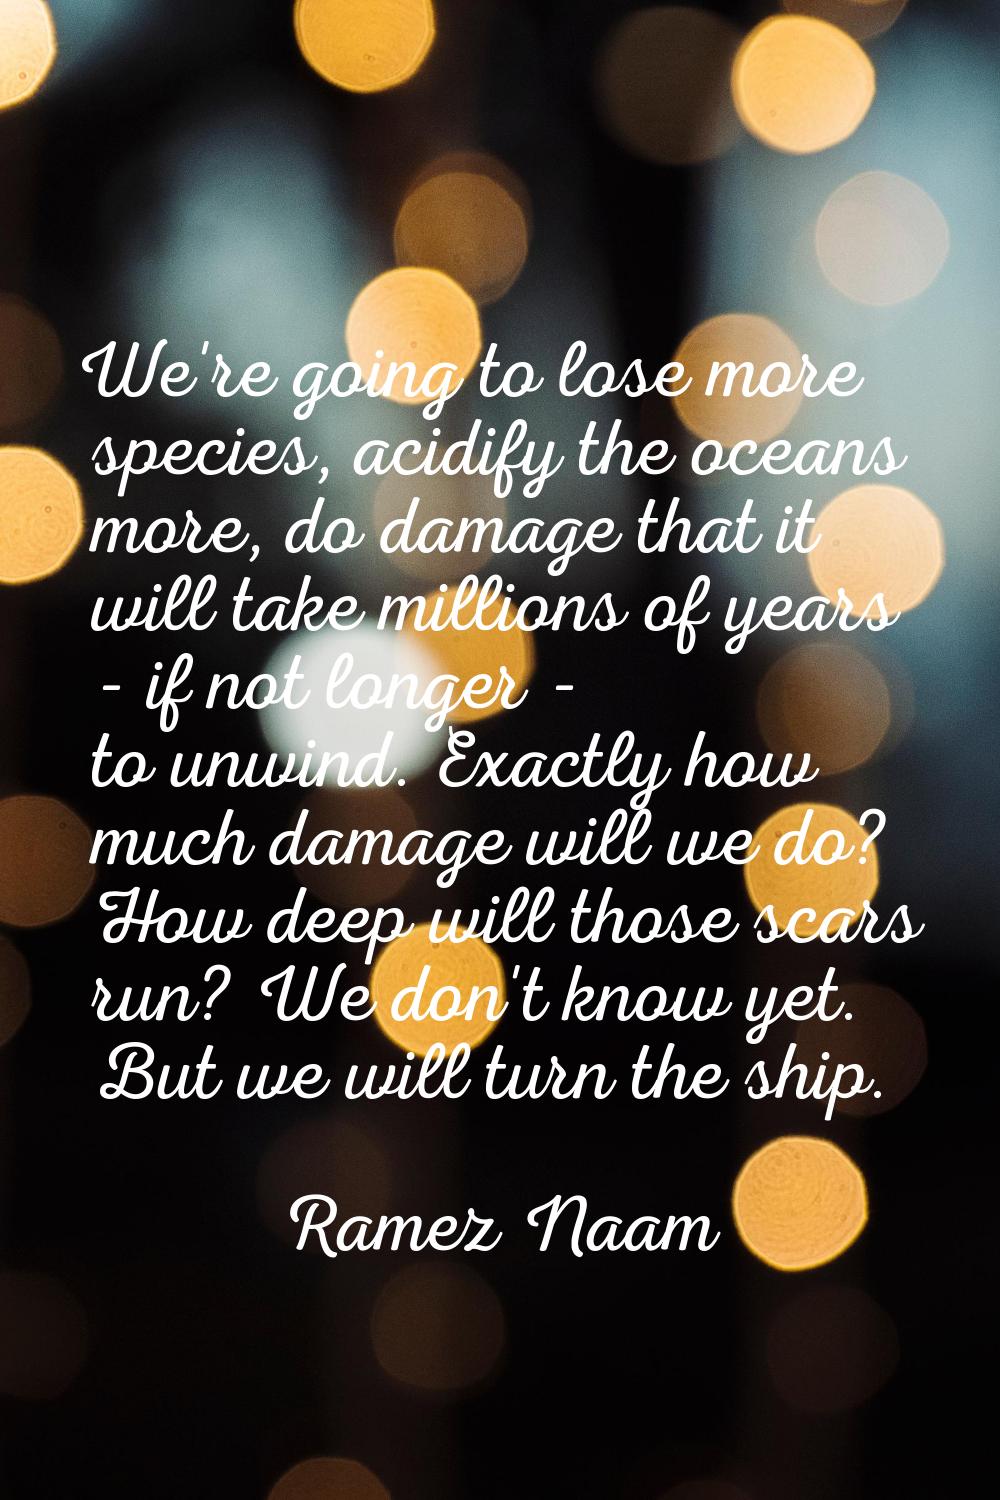 We're going to lose more species, acidify the oceans more, do damage that it will take millions of 